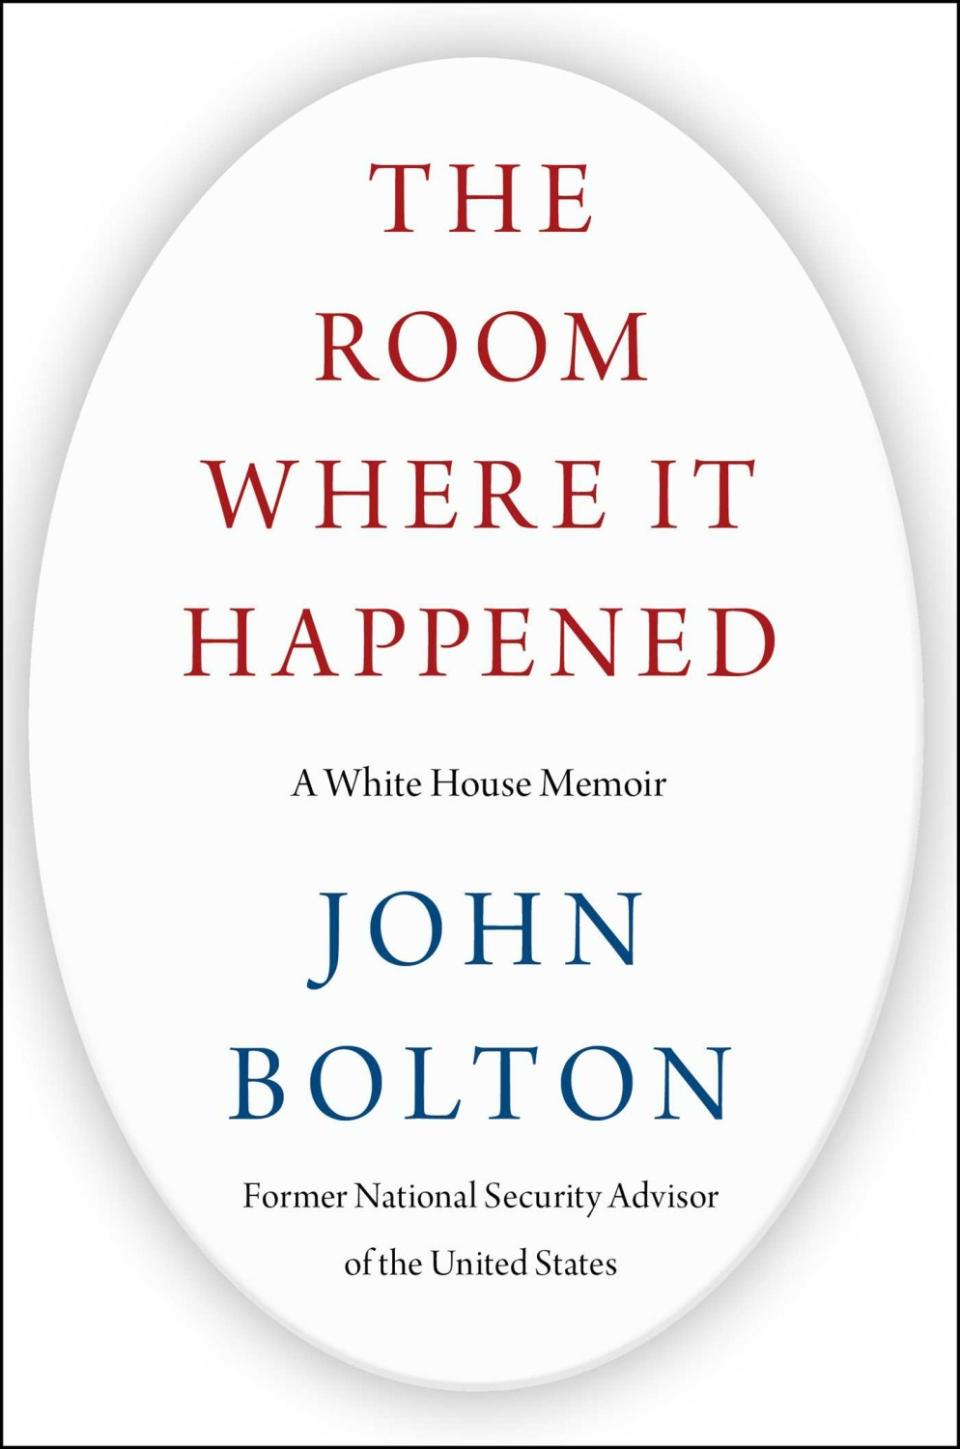 A book jacket for "The Room Where it Happened," by John Bolton.